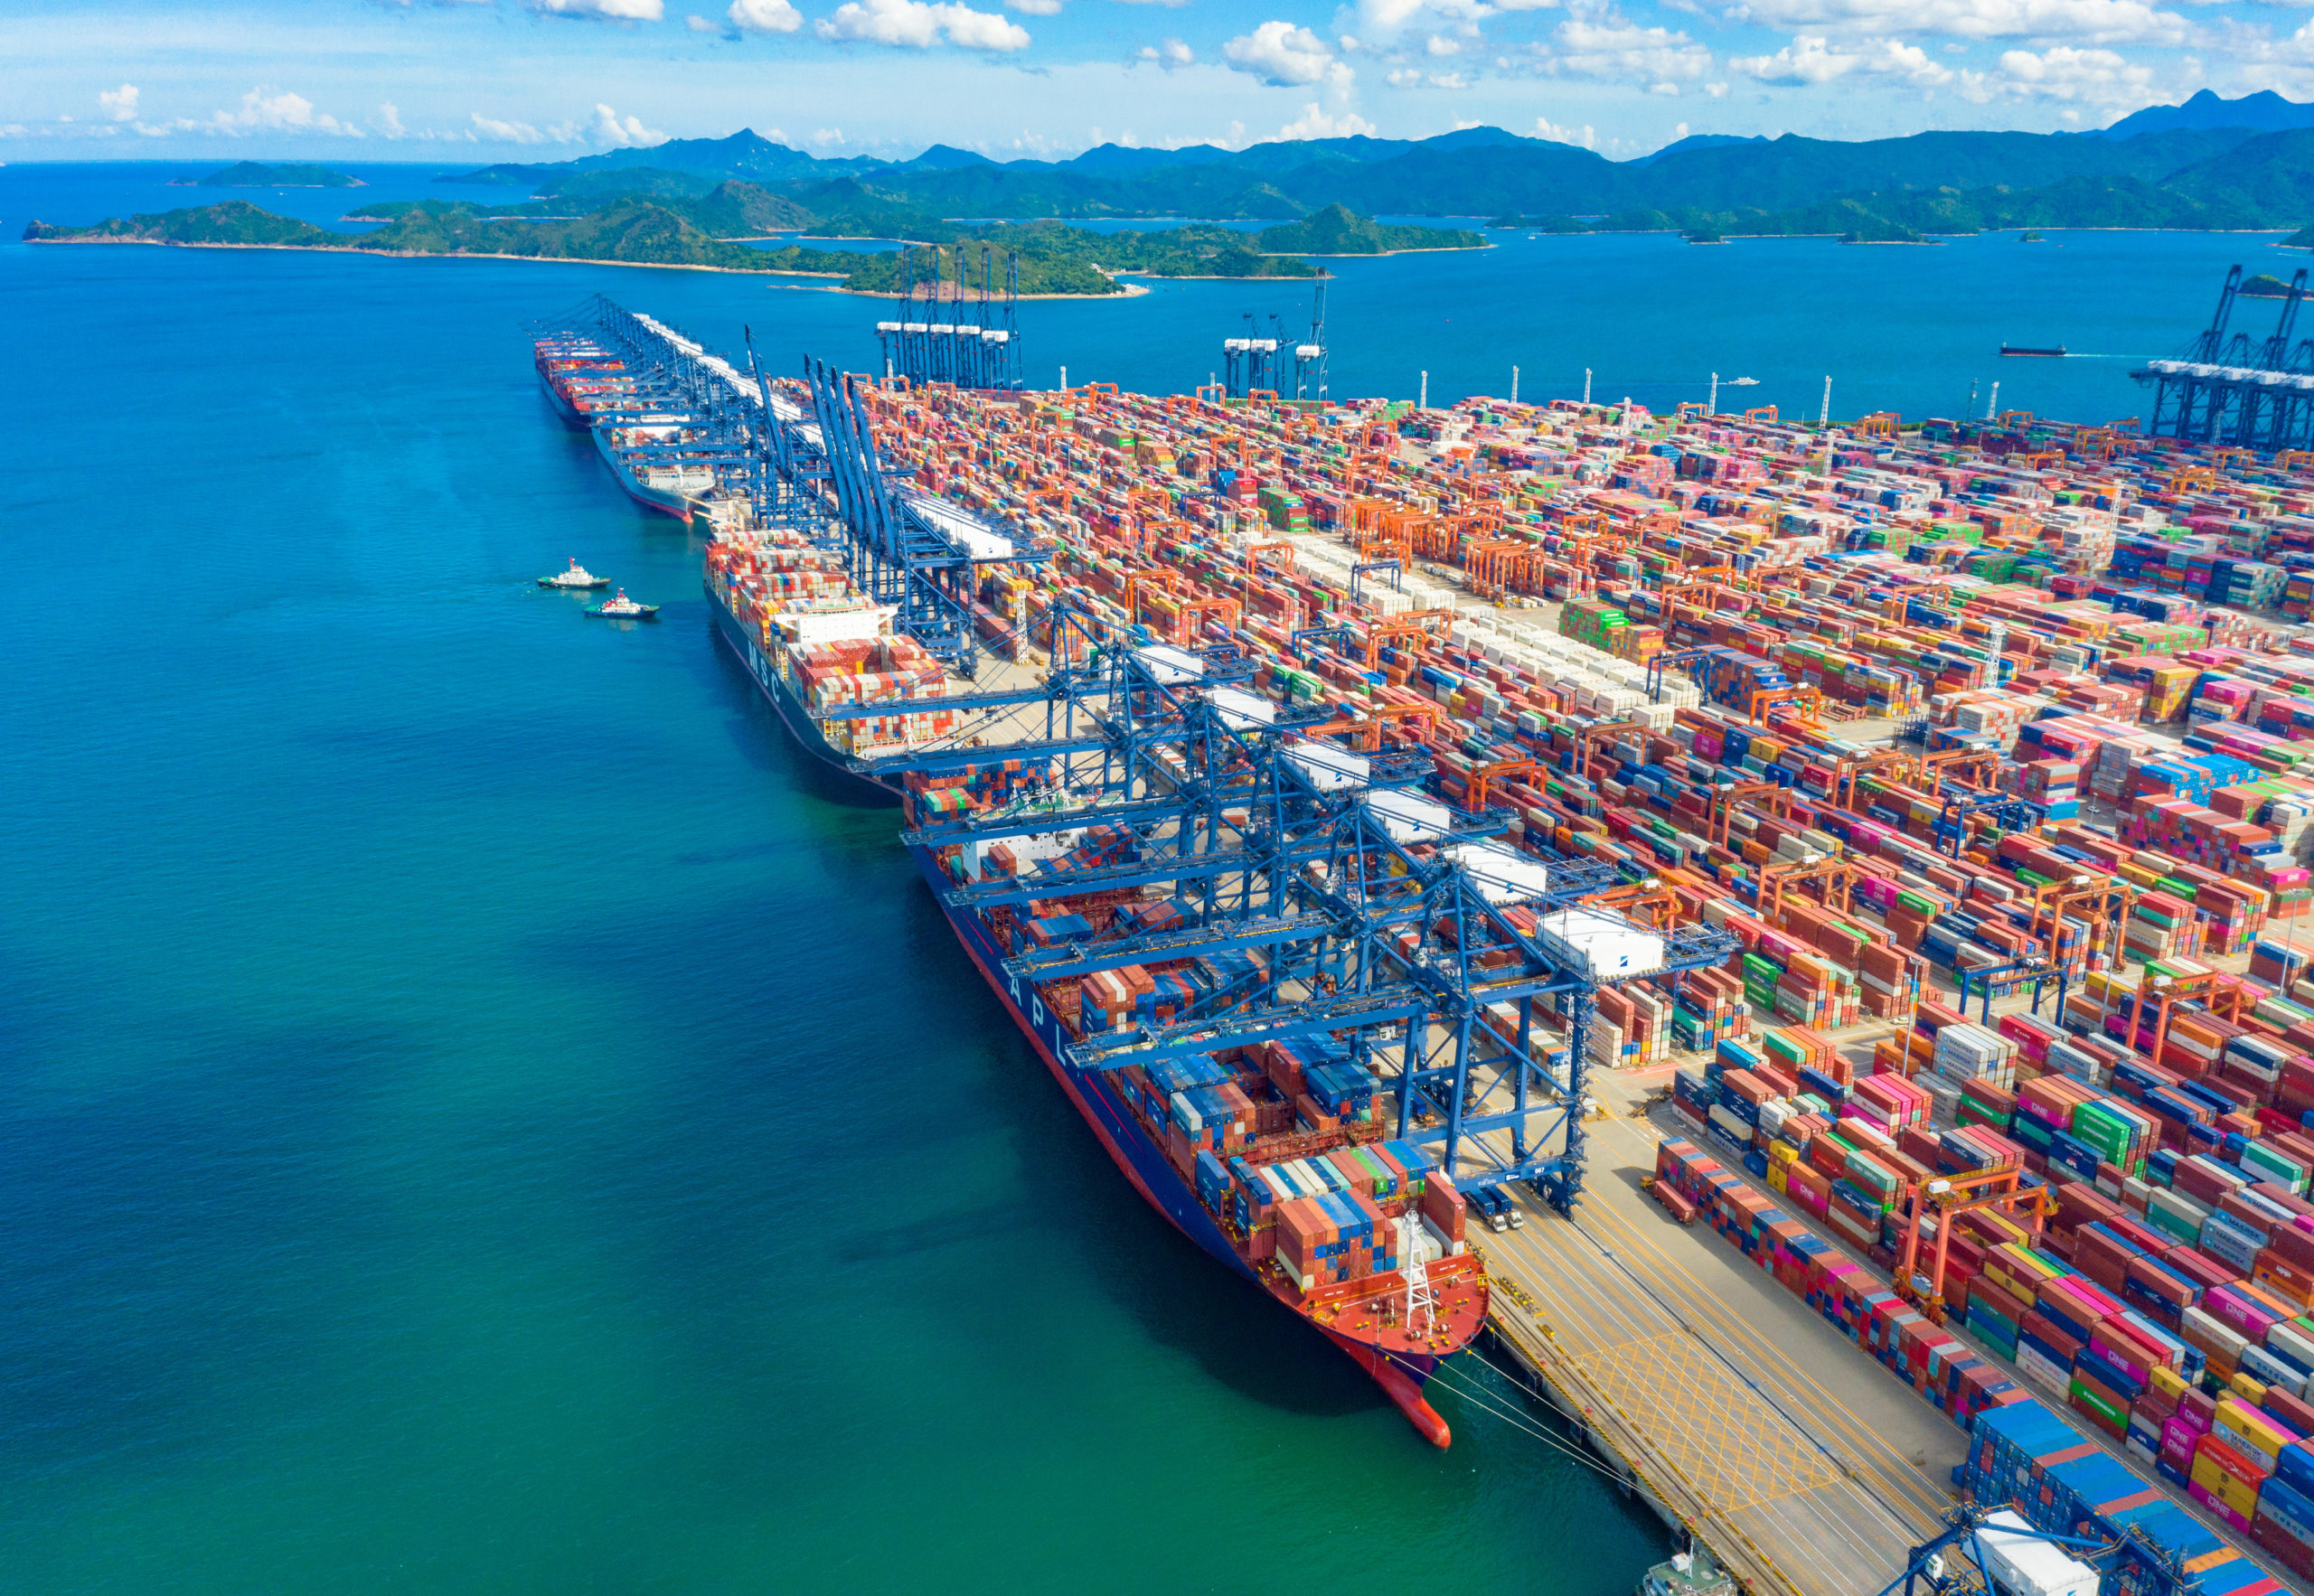 Yantian Port Congestion: How Can Shippers Navigate Another Major Supply  Chain Disruption?